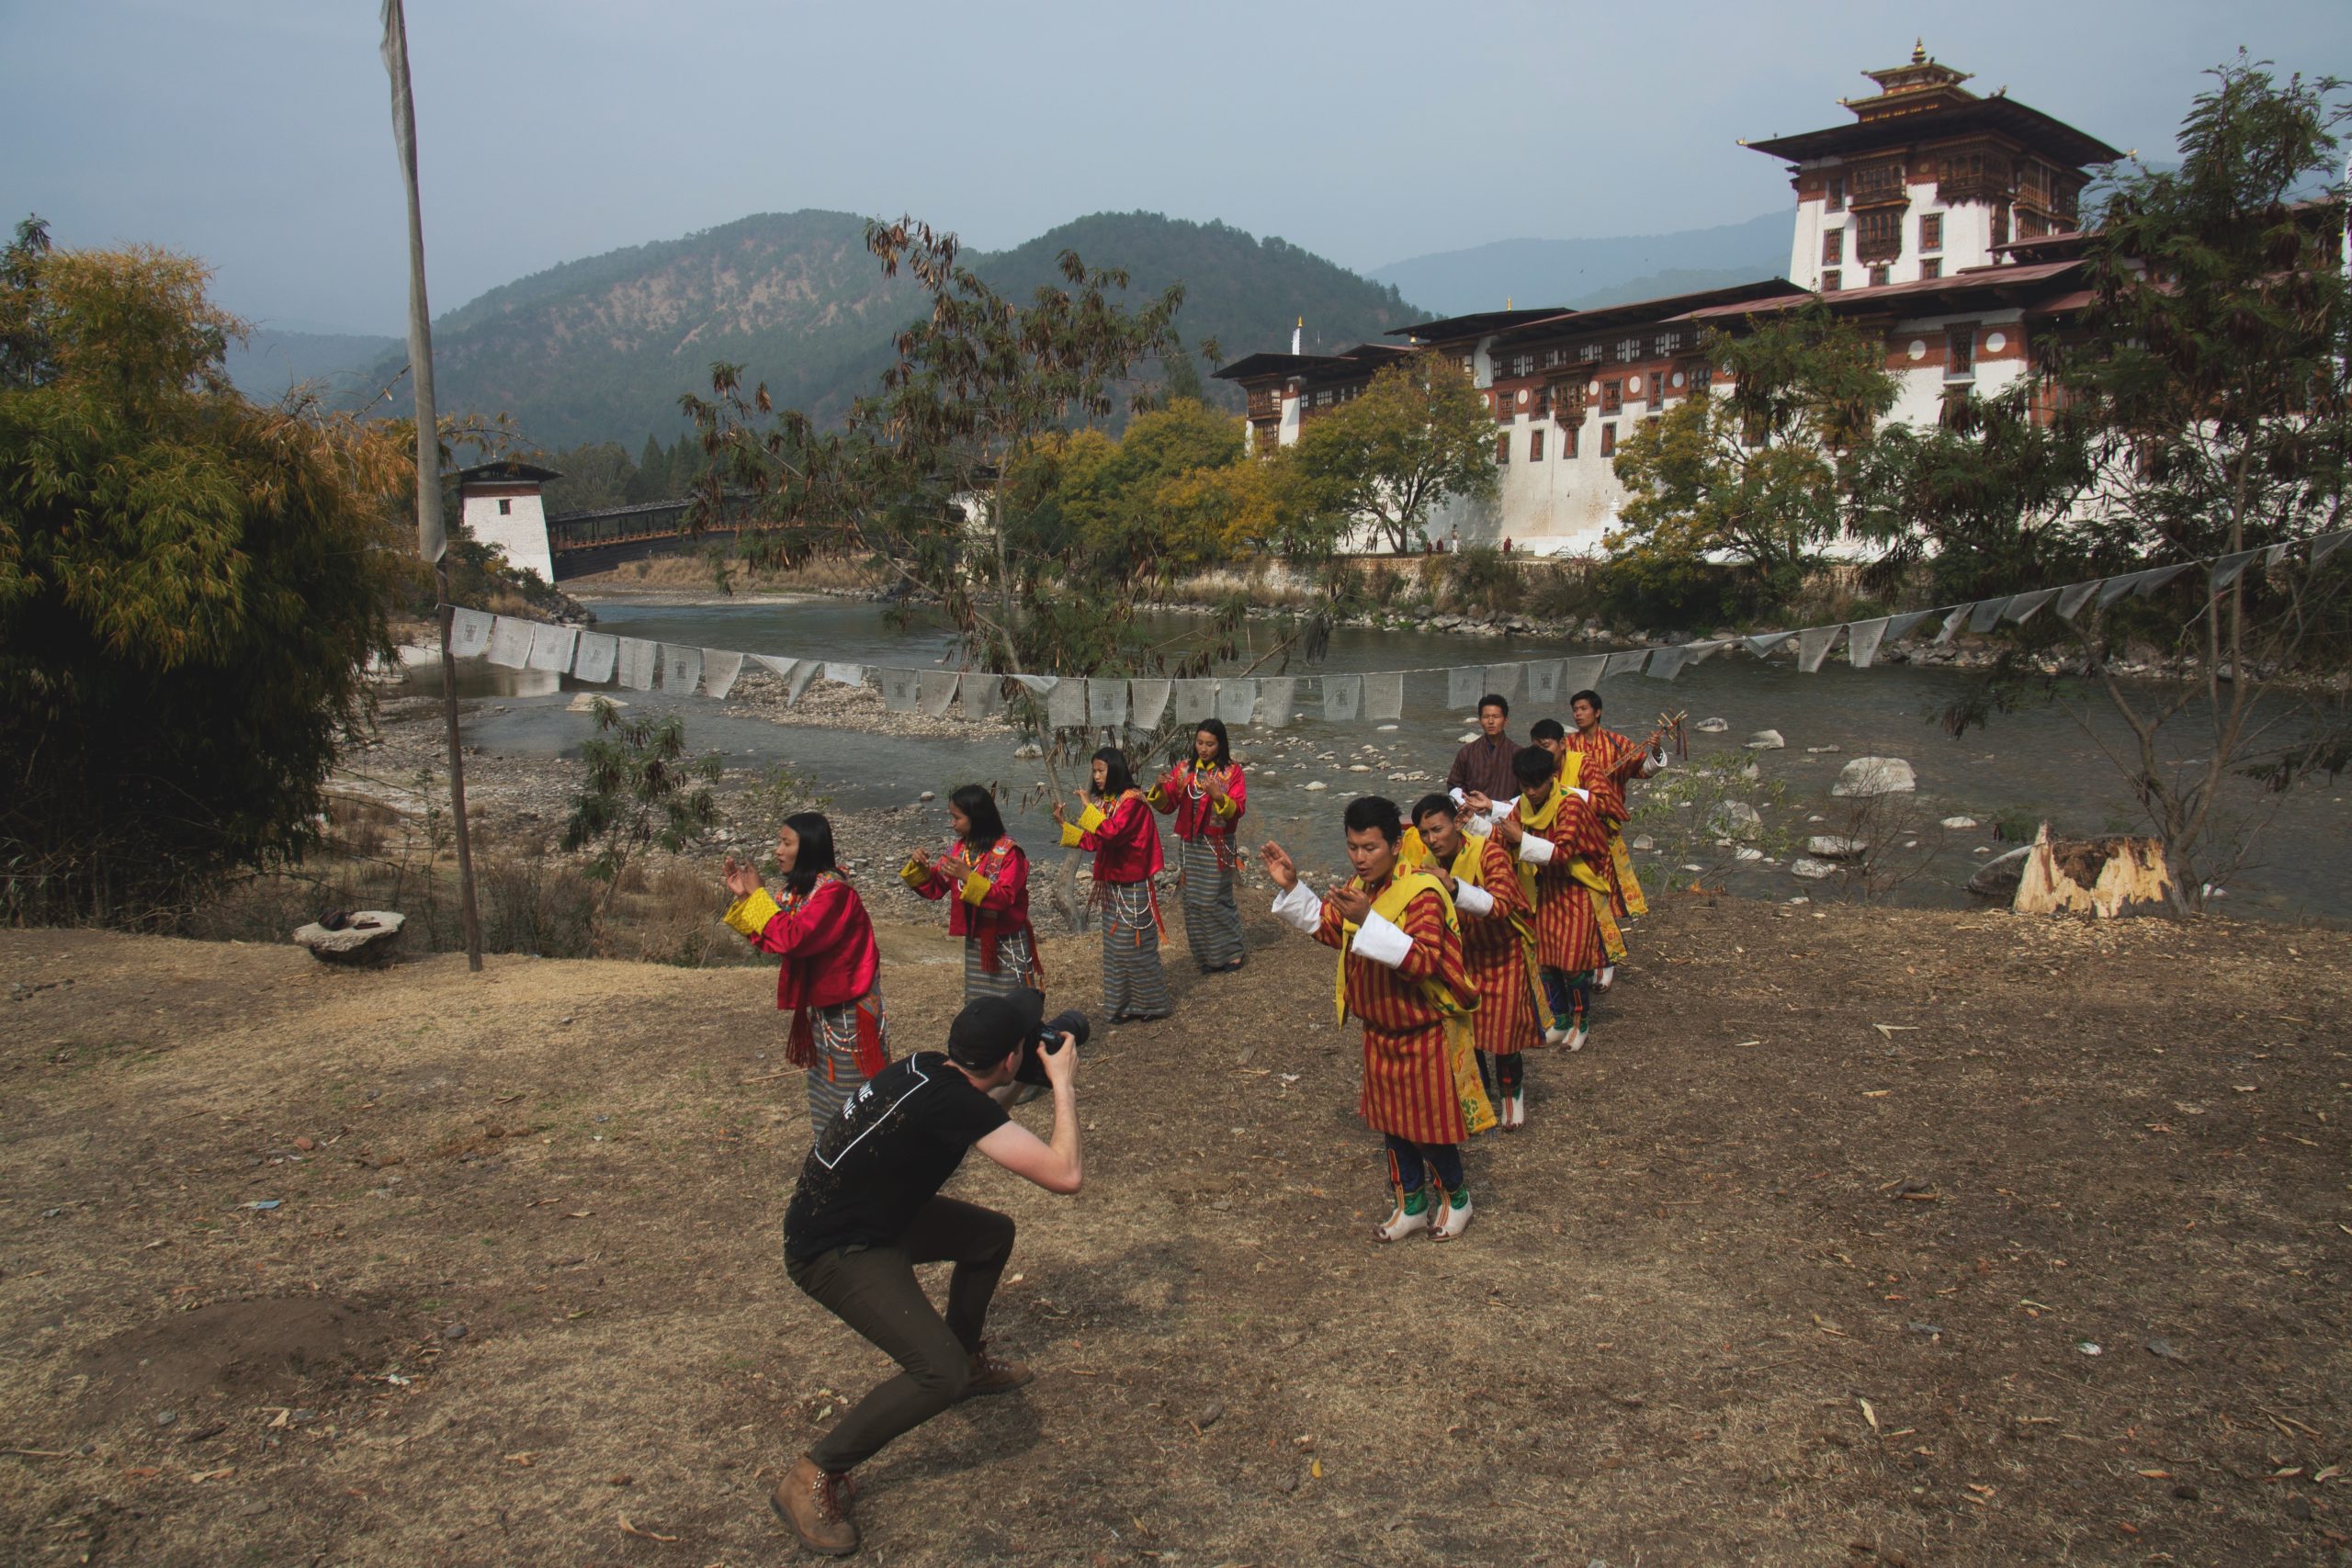 photographer andrew studer photographs traditional Bhutanese dancers in front of Punakha Dzong in Bhutan